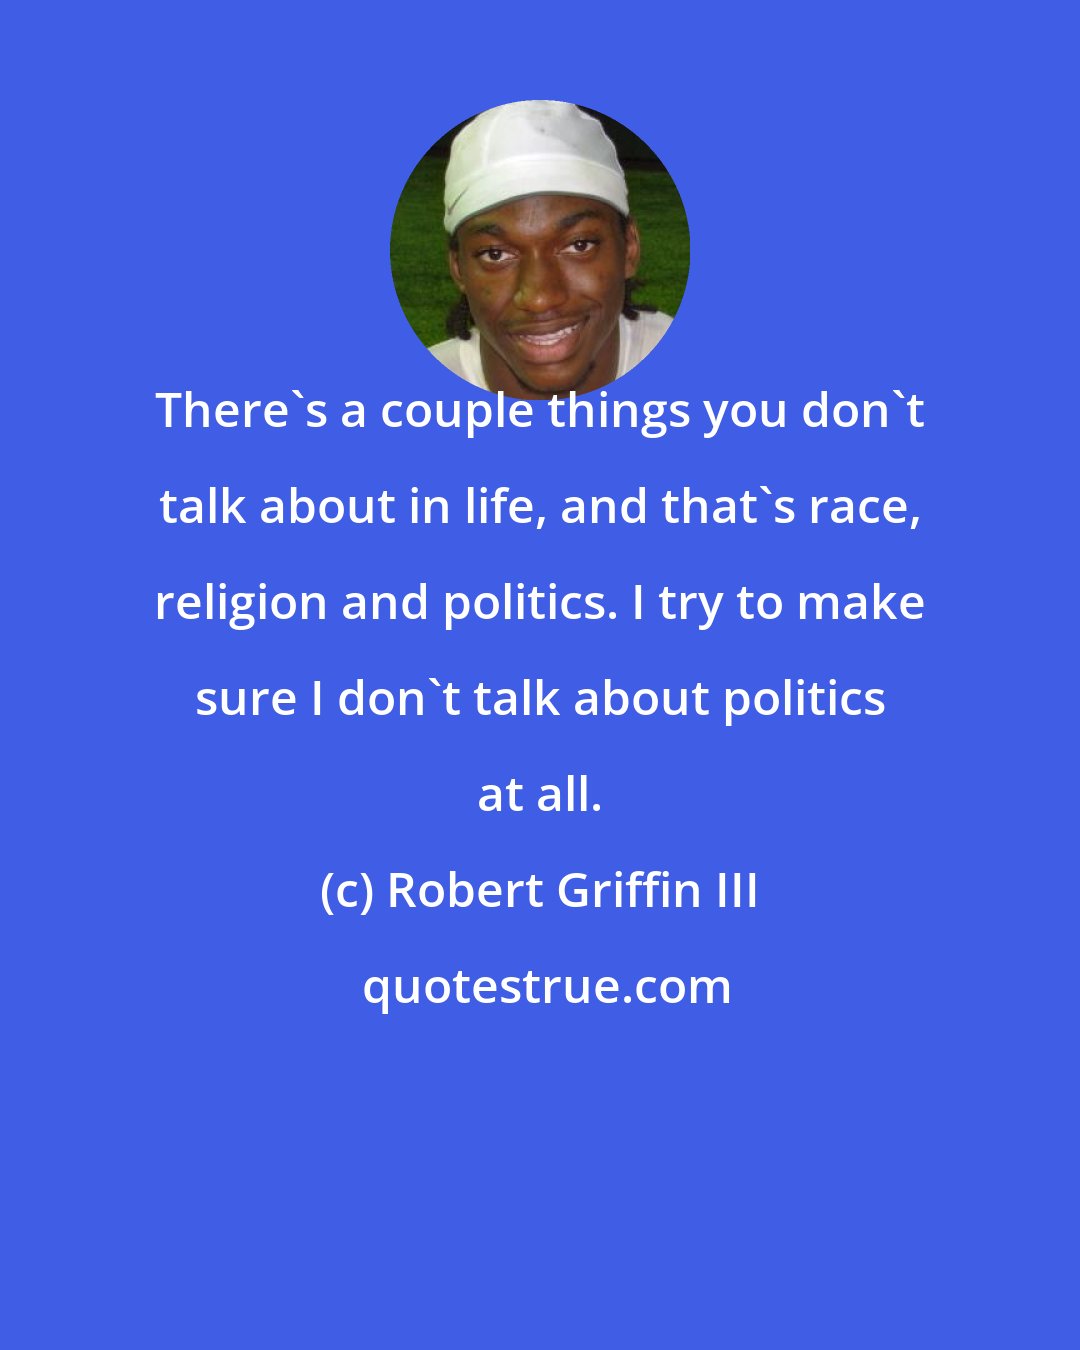 Robert Griffin III: There's a couple things you don't talk about in life, and that's race, religion and politics. I try to make sure I don't talk about politics at all.